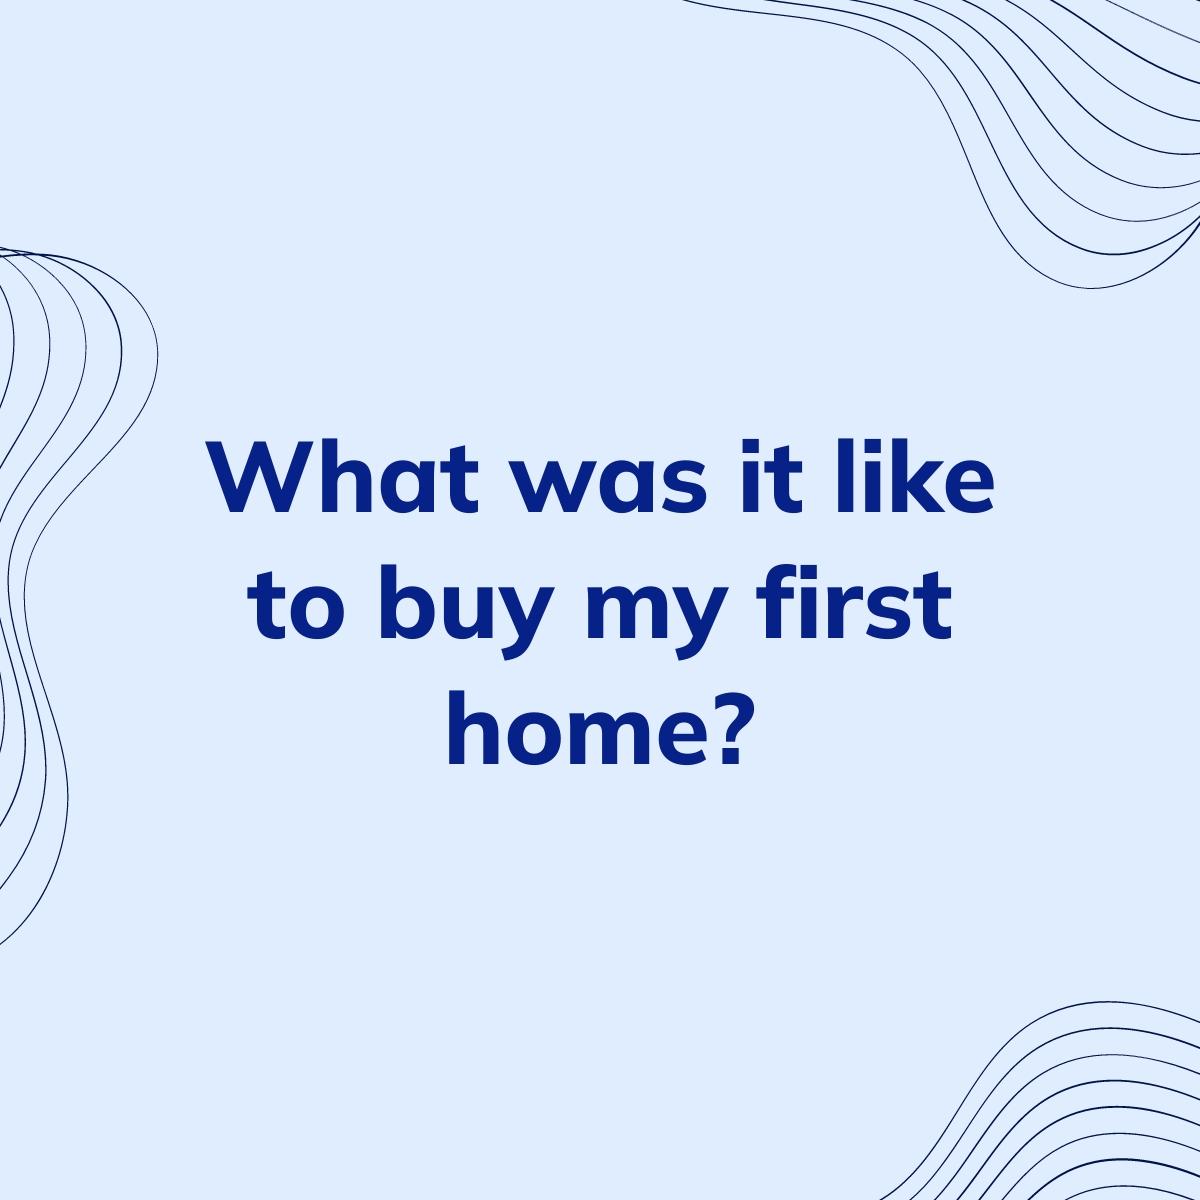 Journal Prompt: What was it like to buy my first home?